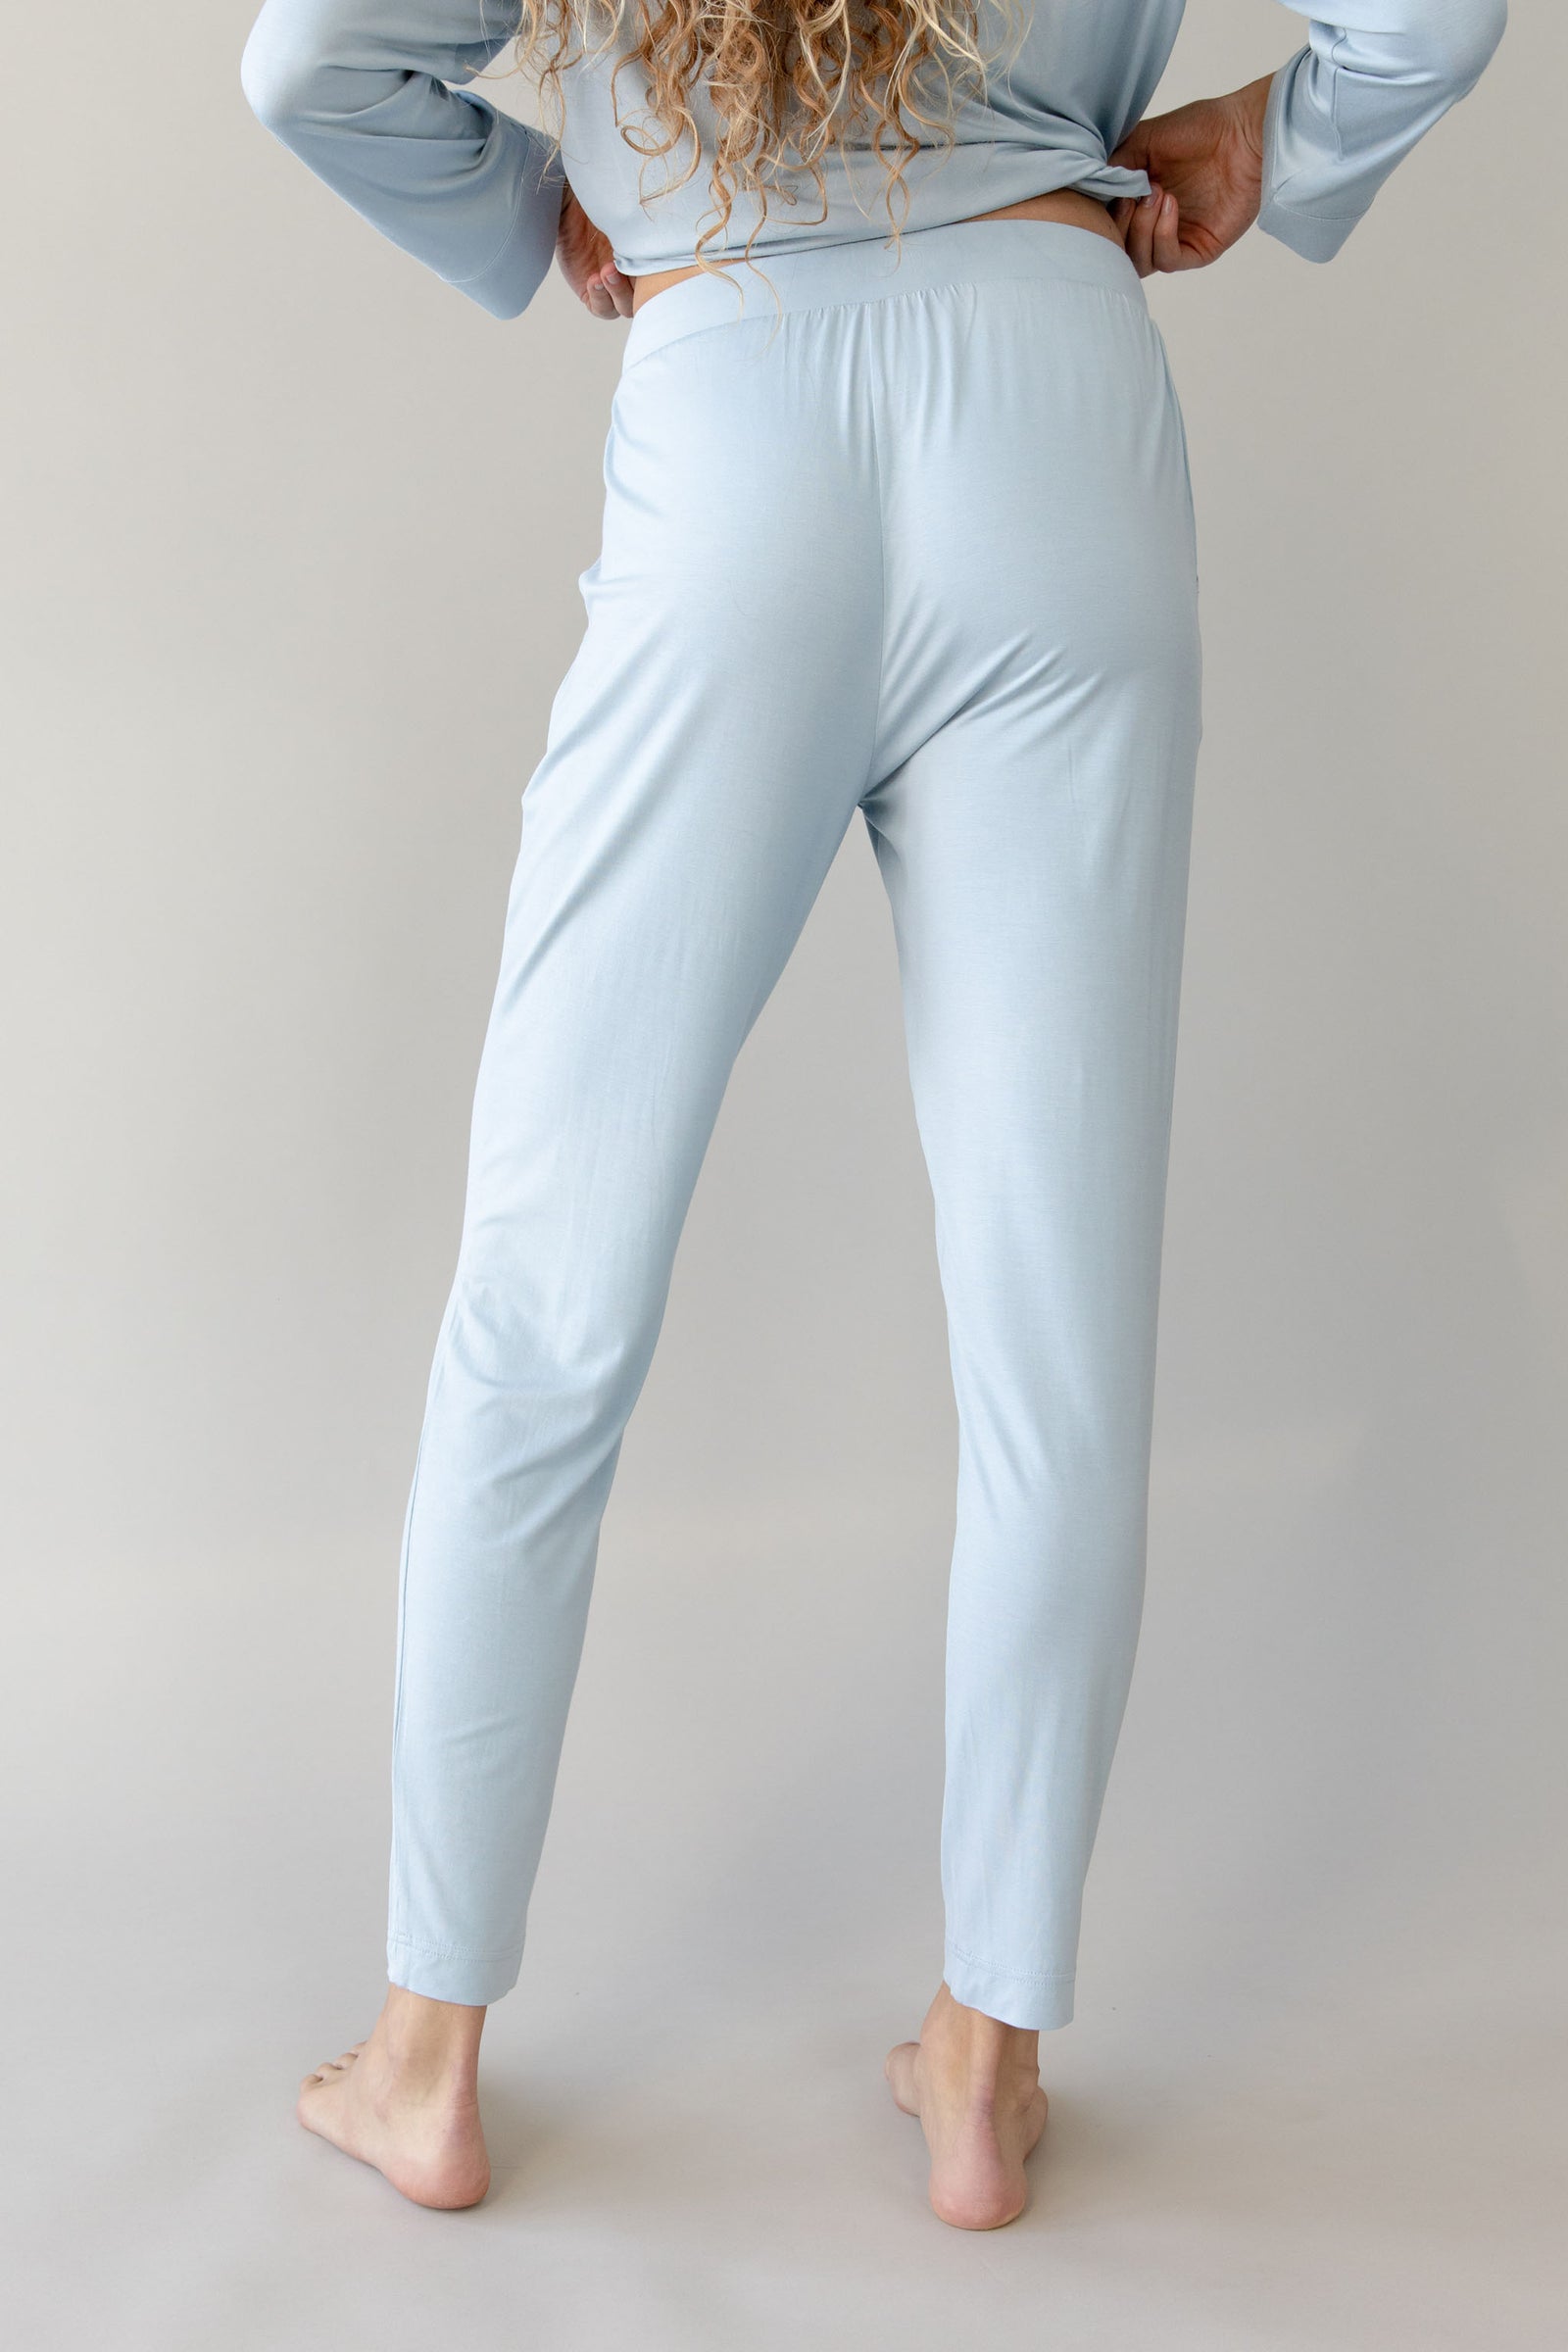 Women's Stretch Knit Bamboo Tapered Pants